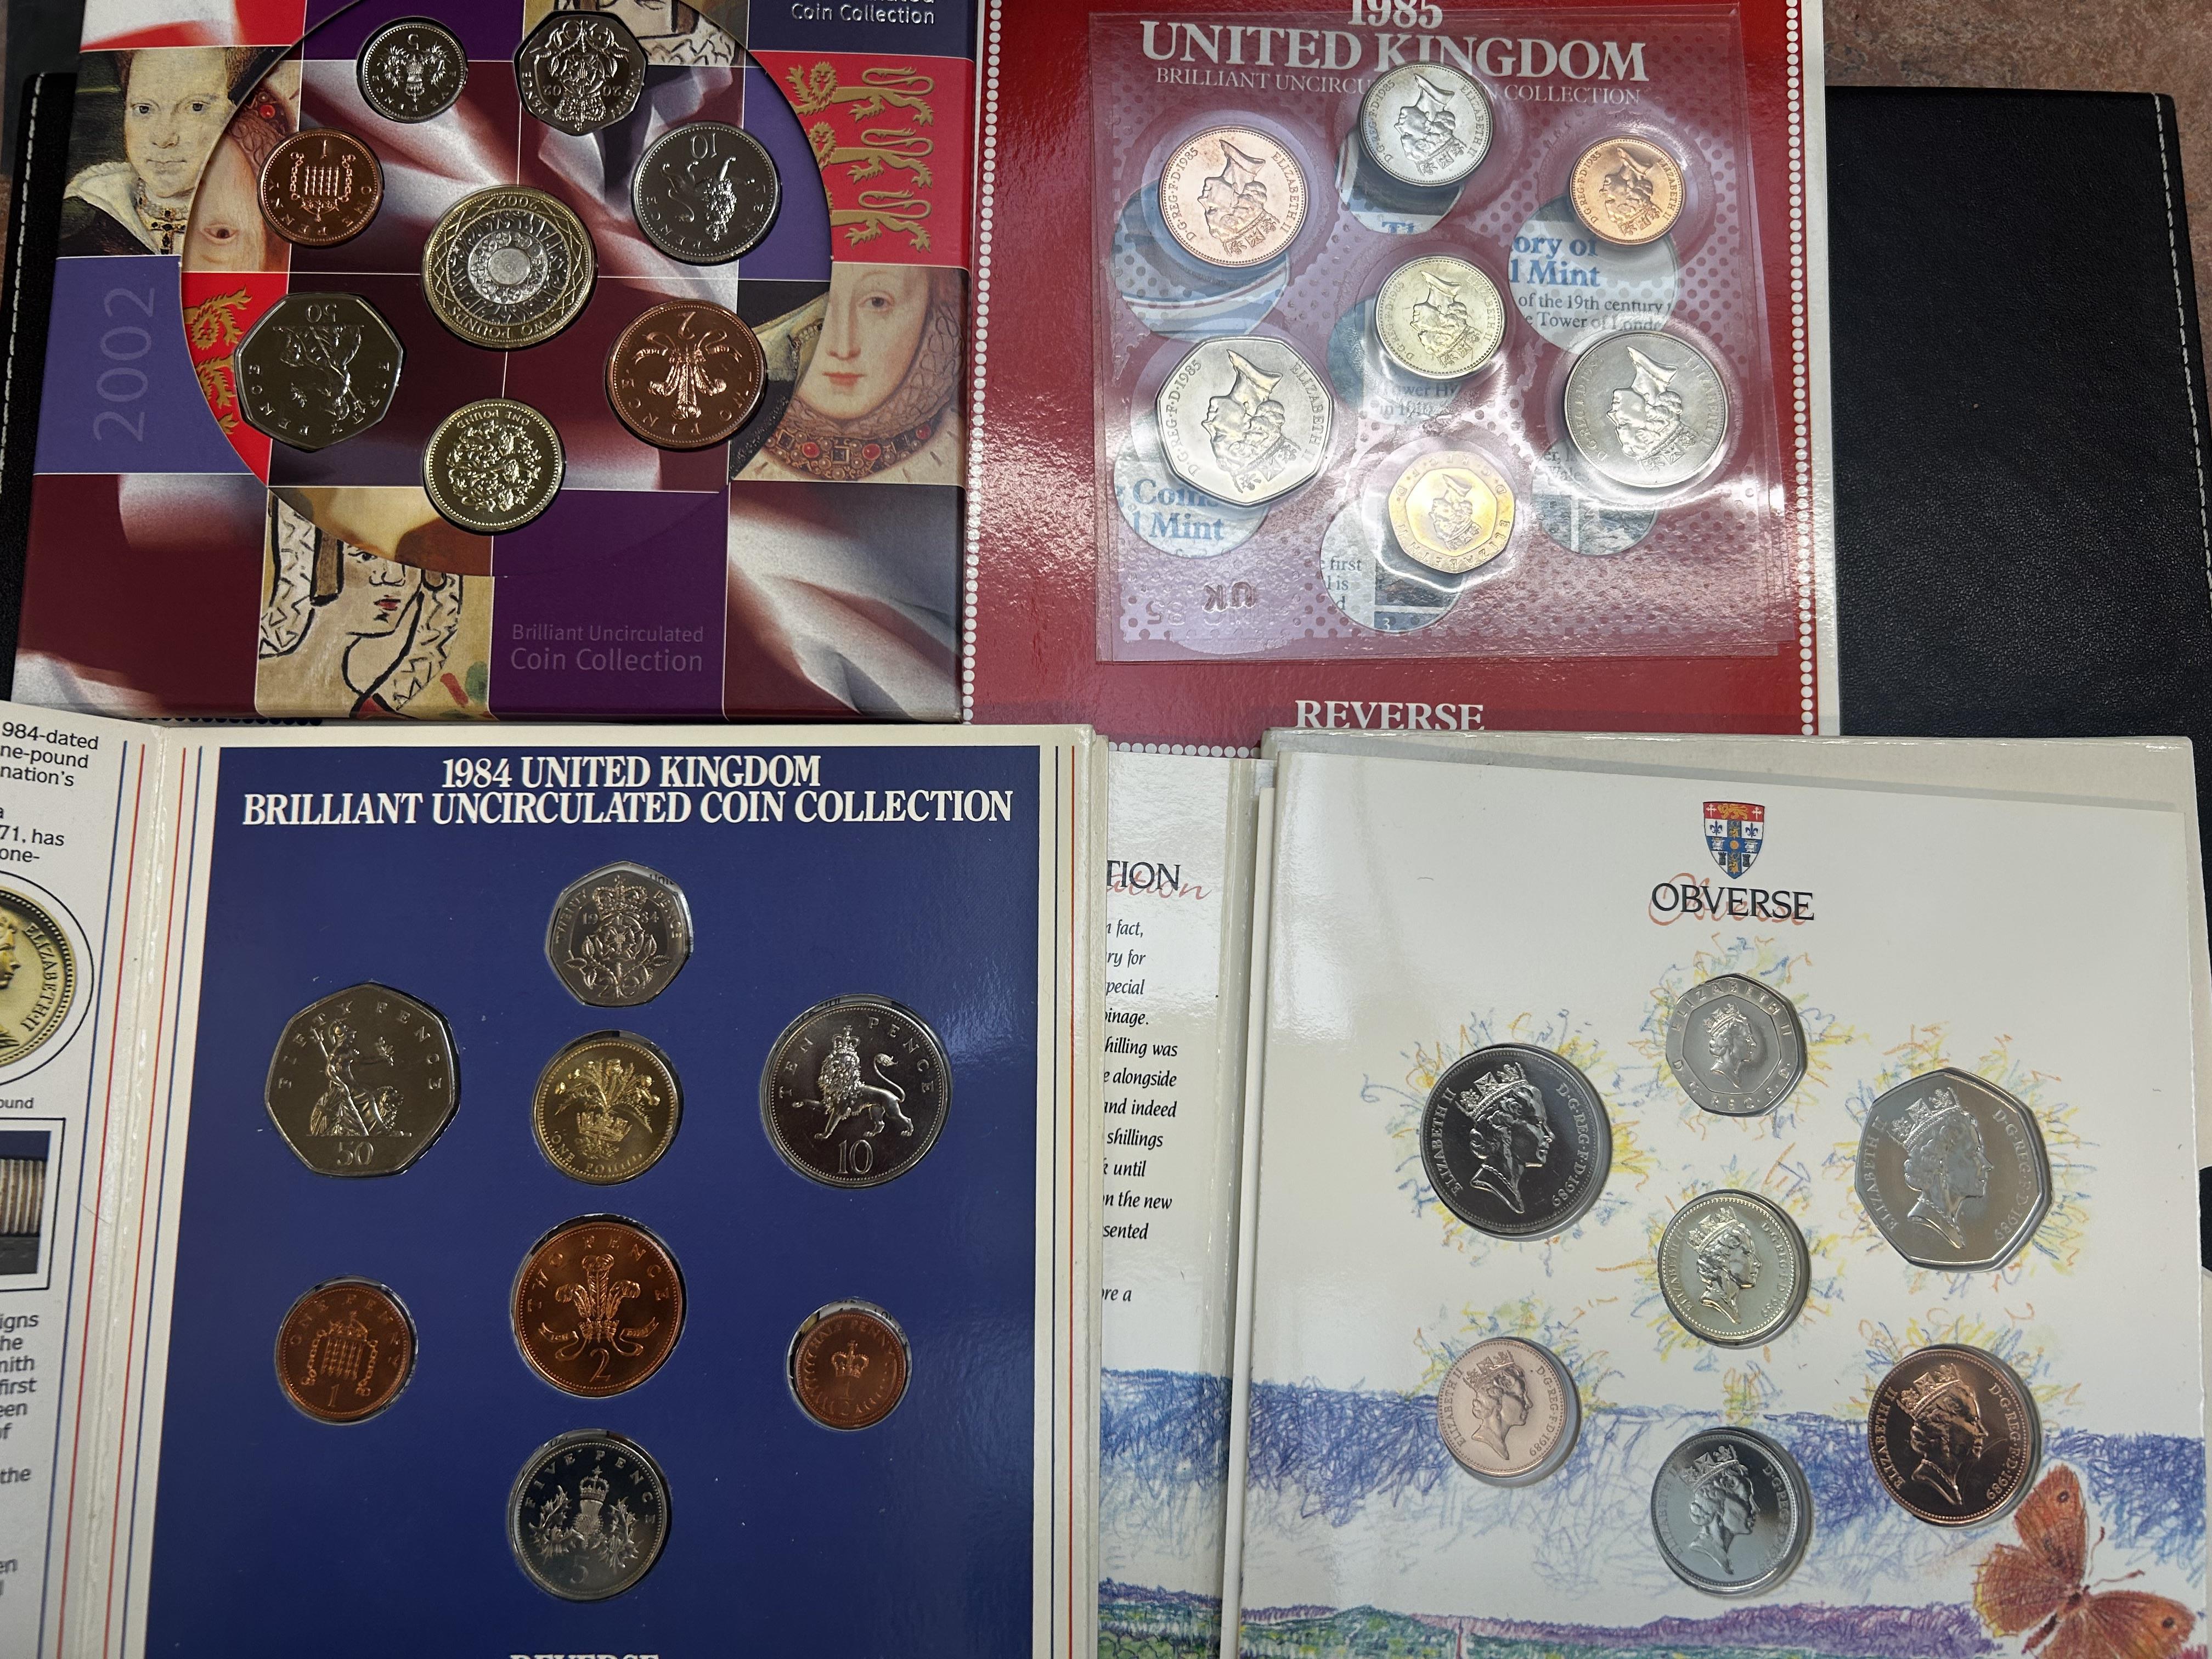 2002 uncirculated coin set, 1985 uncirculated coin